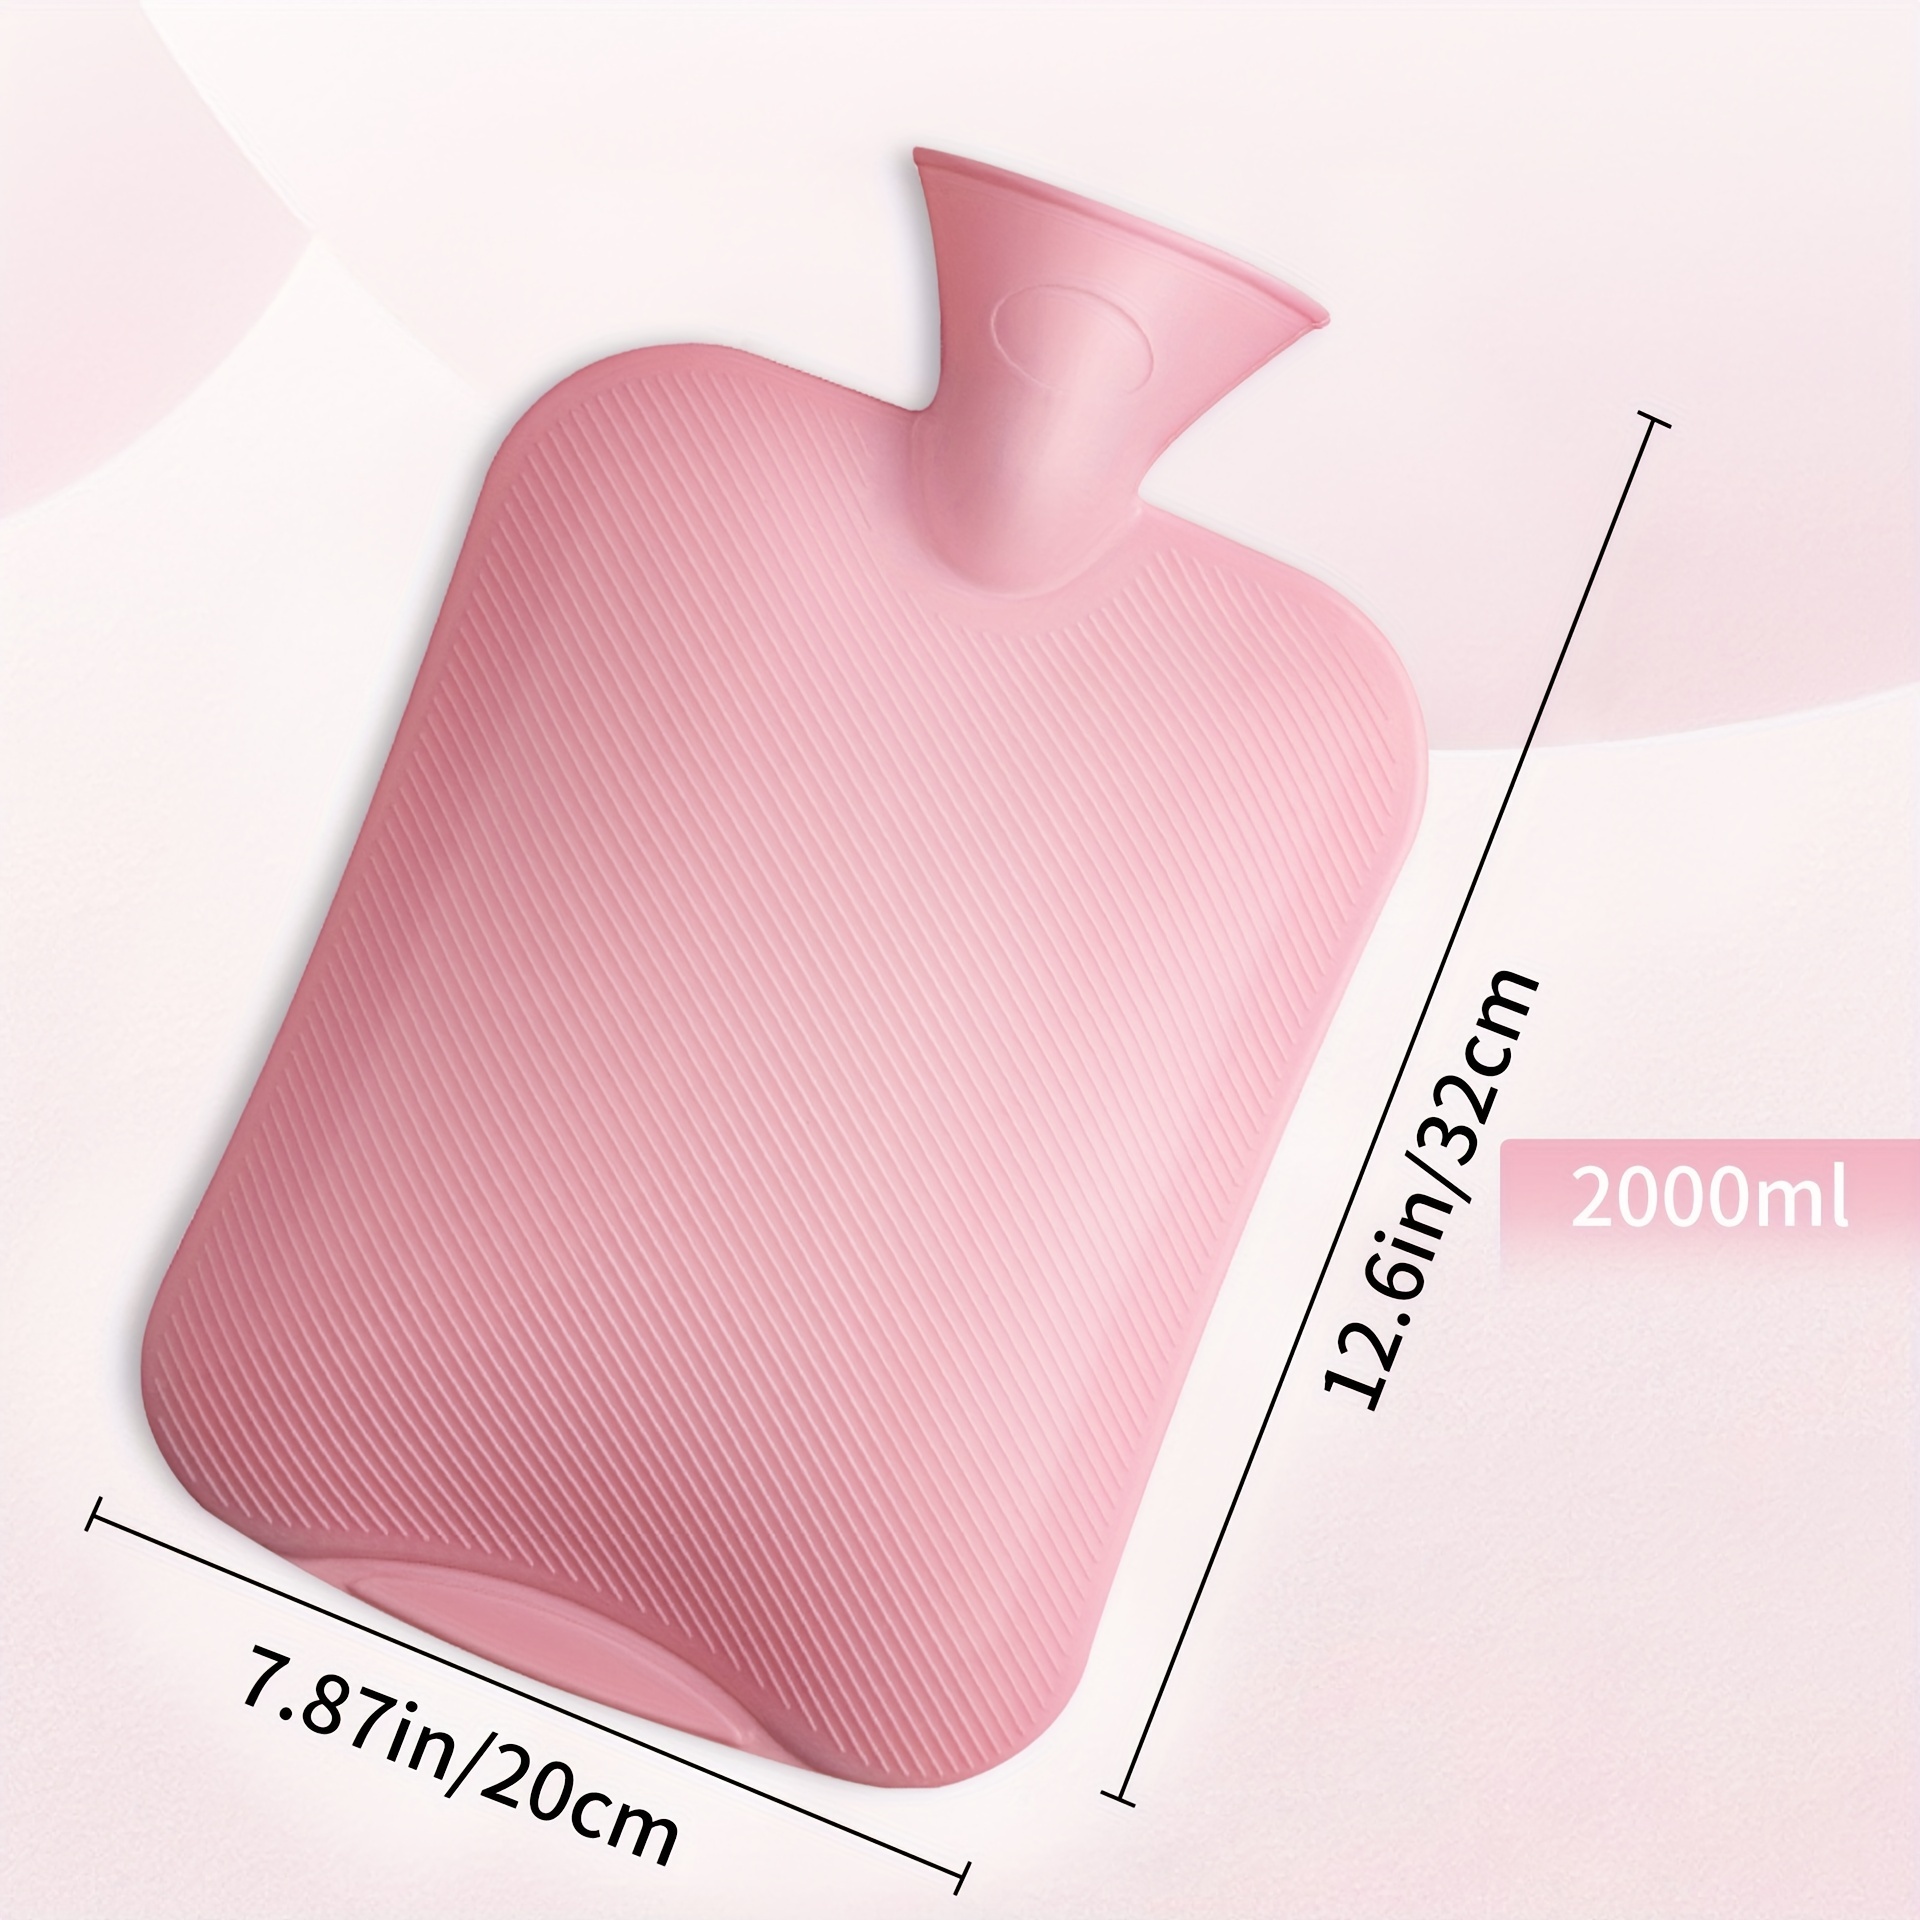 320ml Hot Water Bottle with Knited Cover, Mini Hot Water Bag for Pain  Relief, Waist, Back, Neck, Shoulders, Small Leak Proof Hot Water Bottle  with